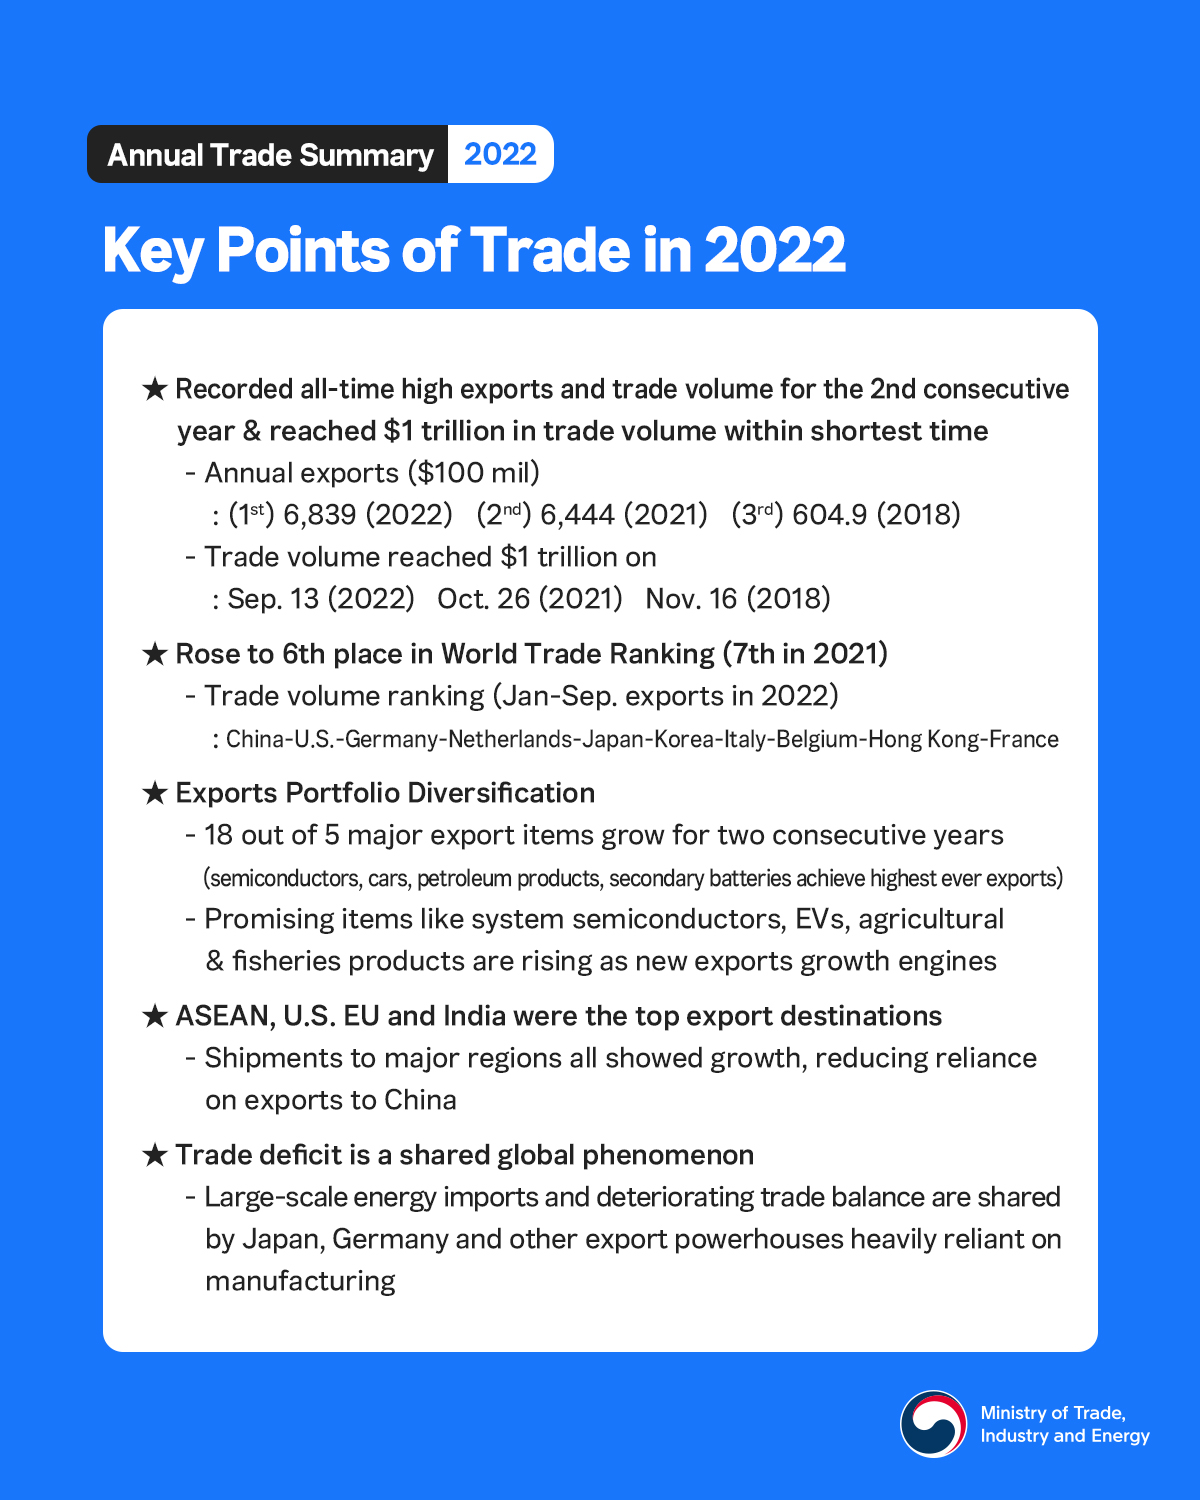 Korea achieves all-time high exports and trade volume in 2022! Image 1